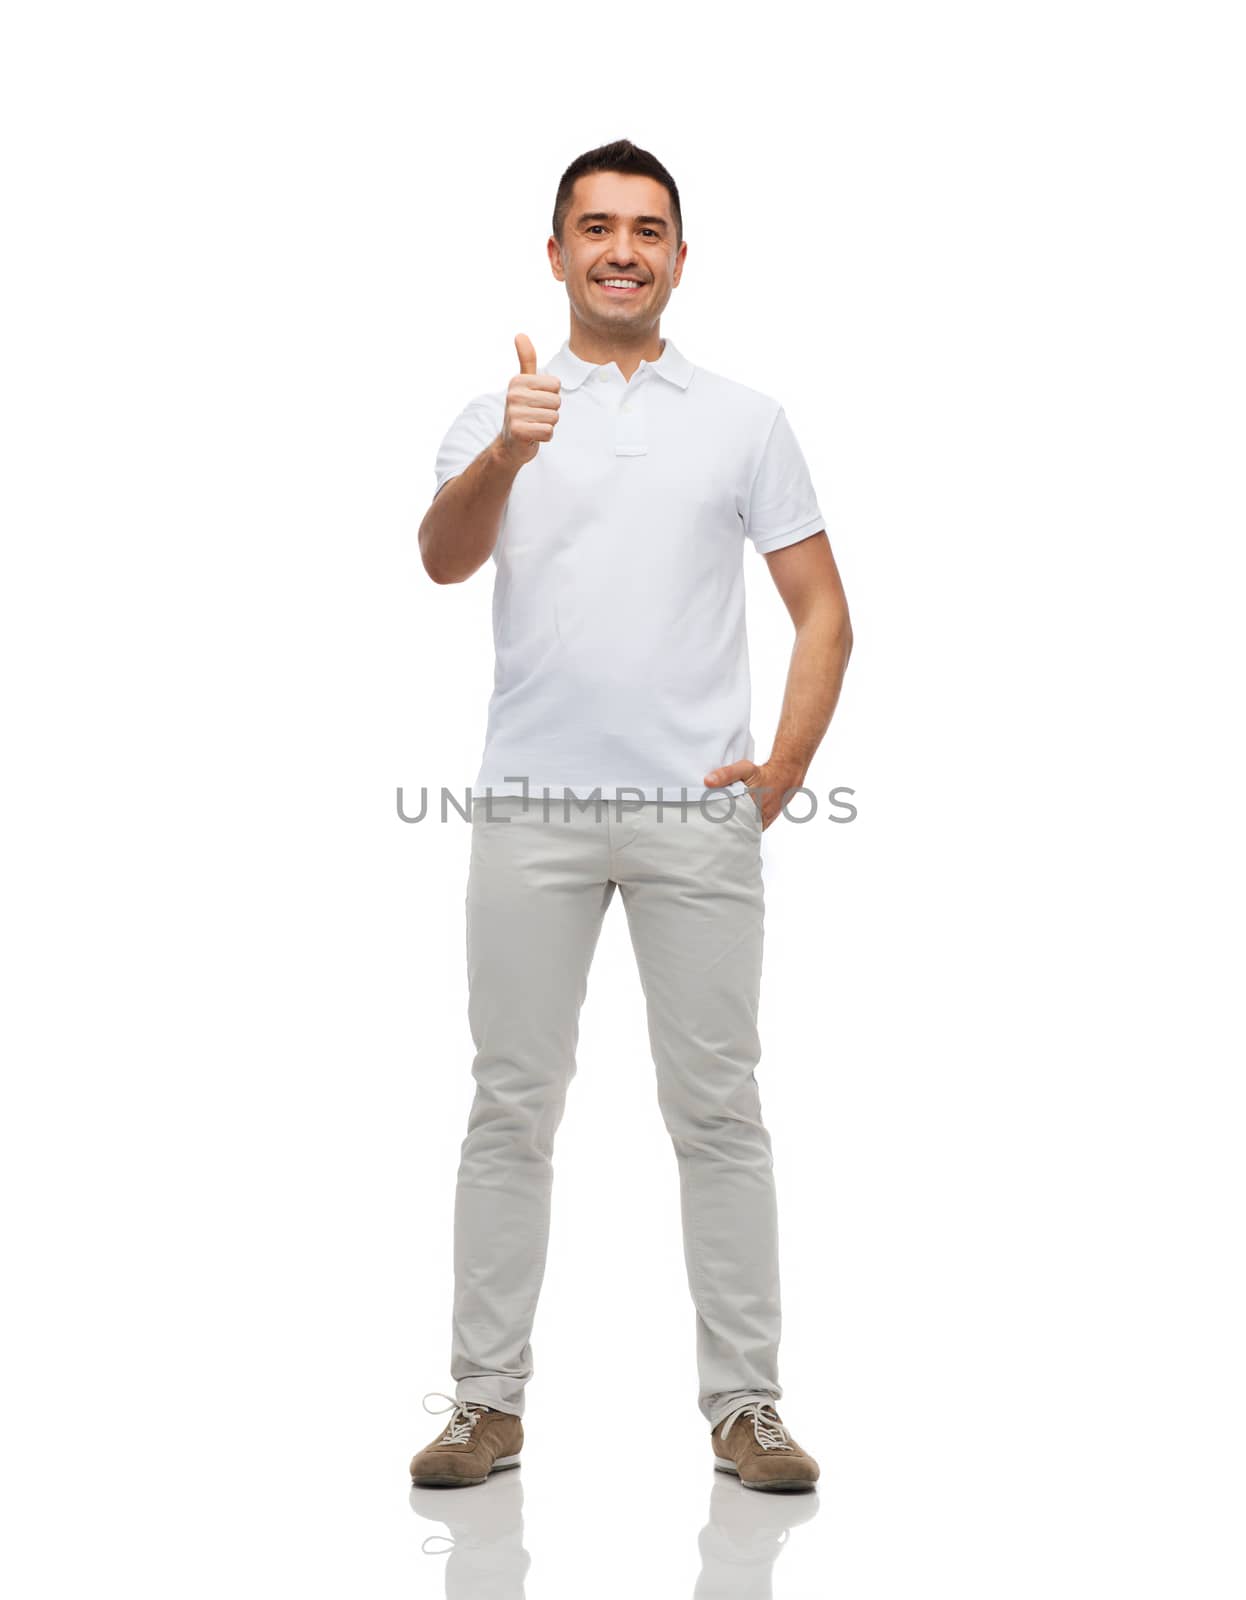 happiness, gesture and people concept - smiling man showing thumbs up